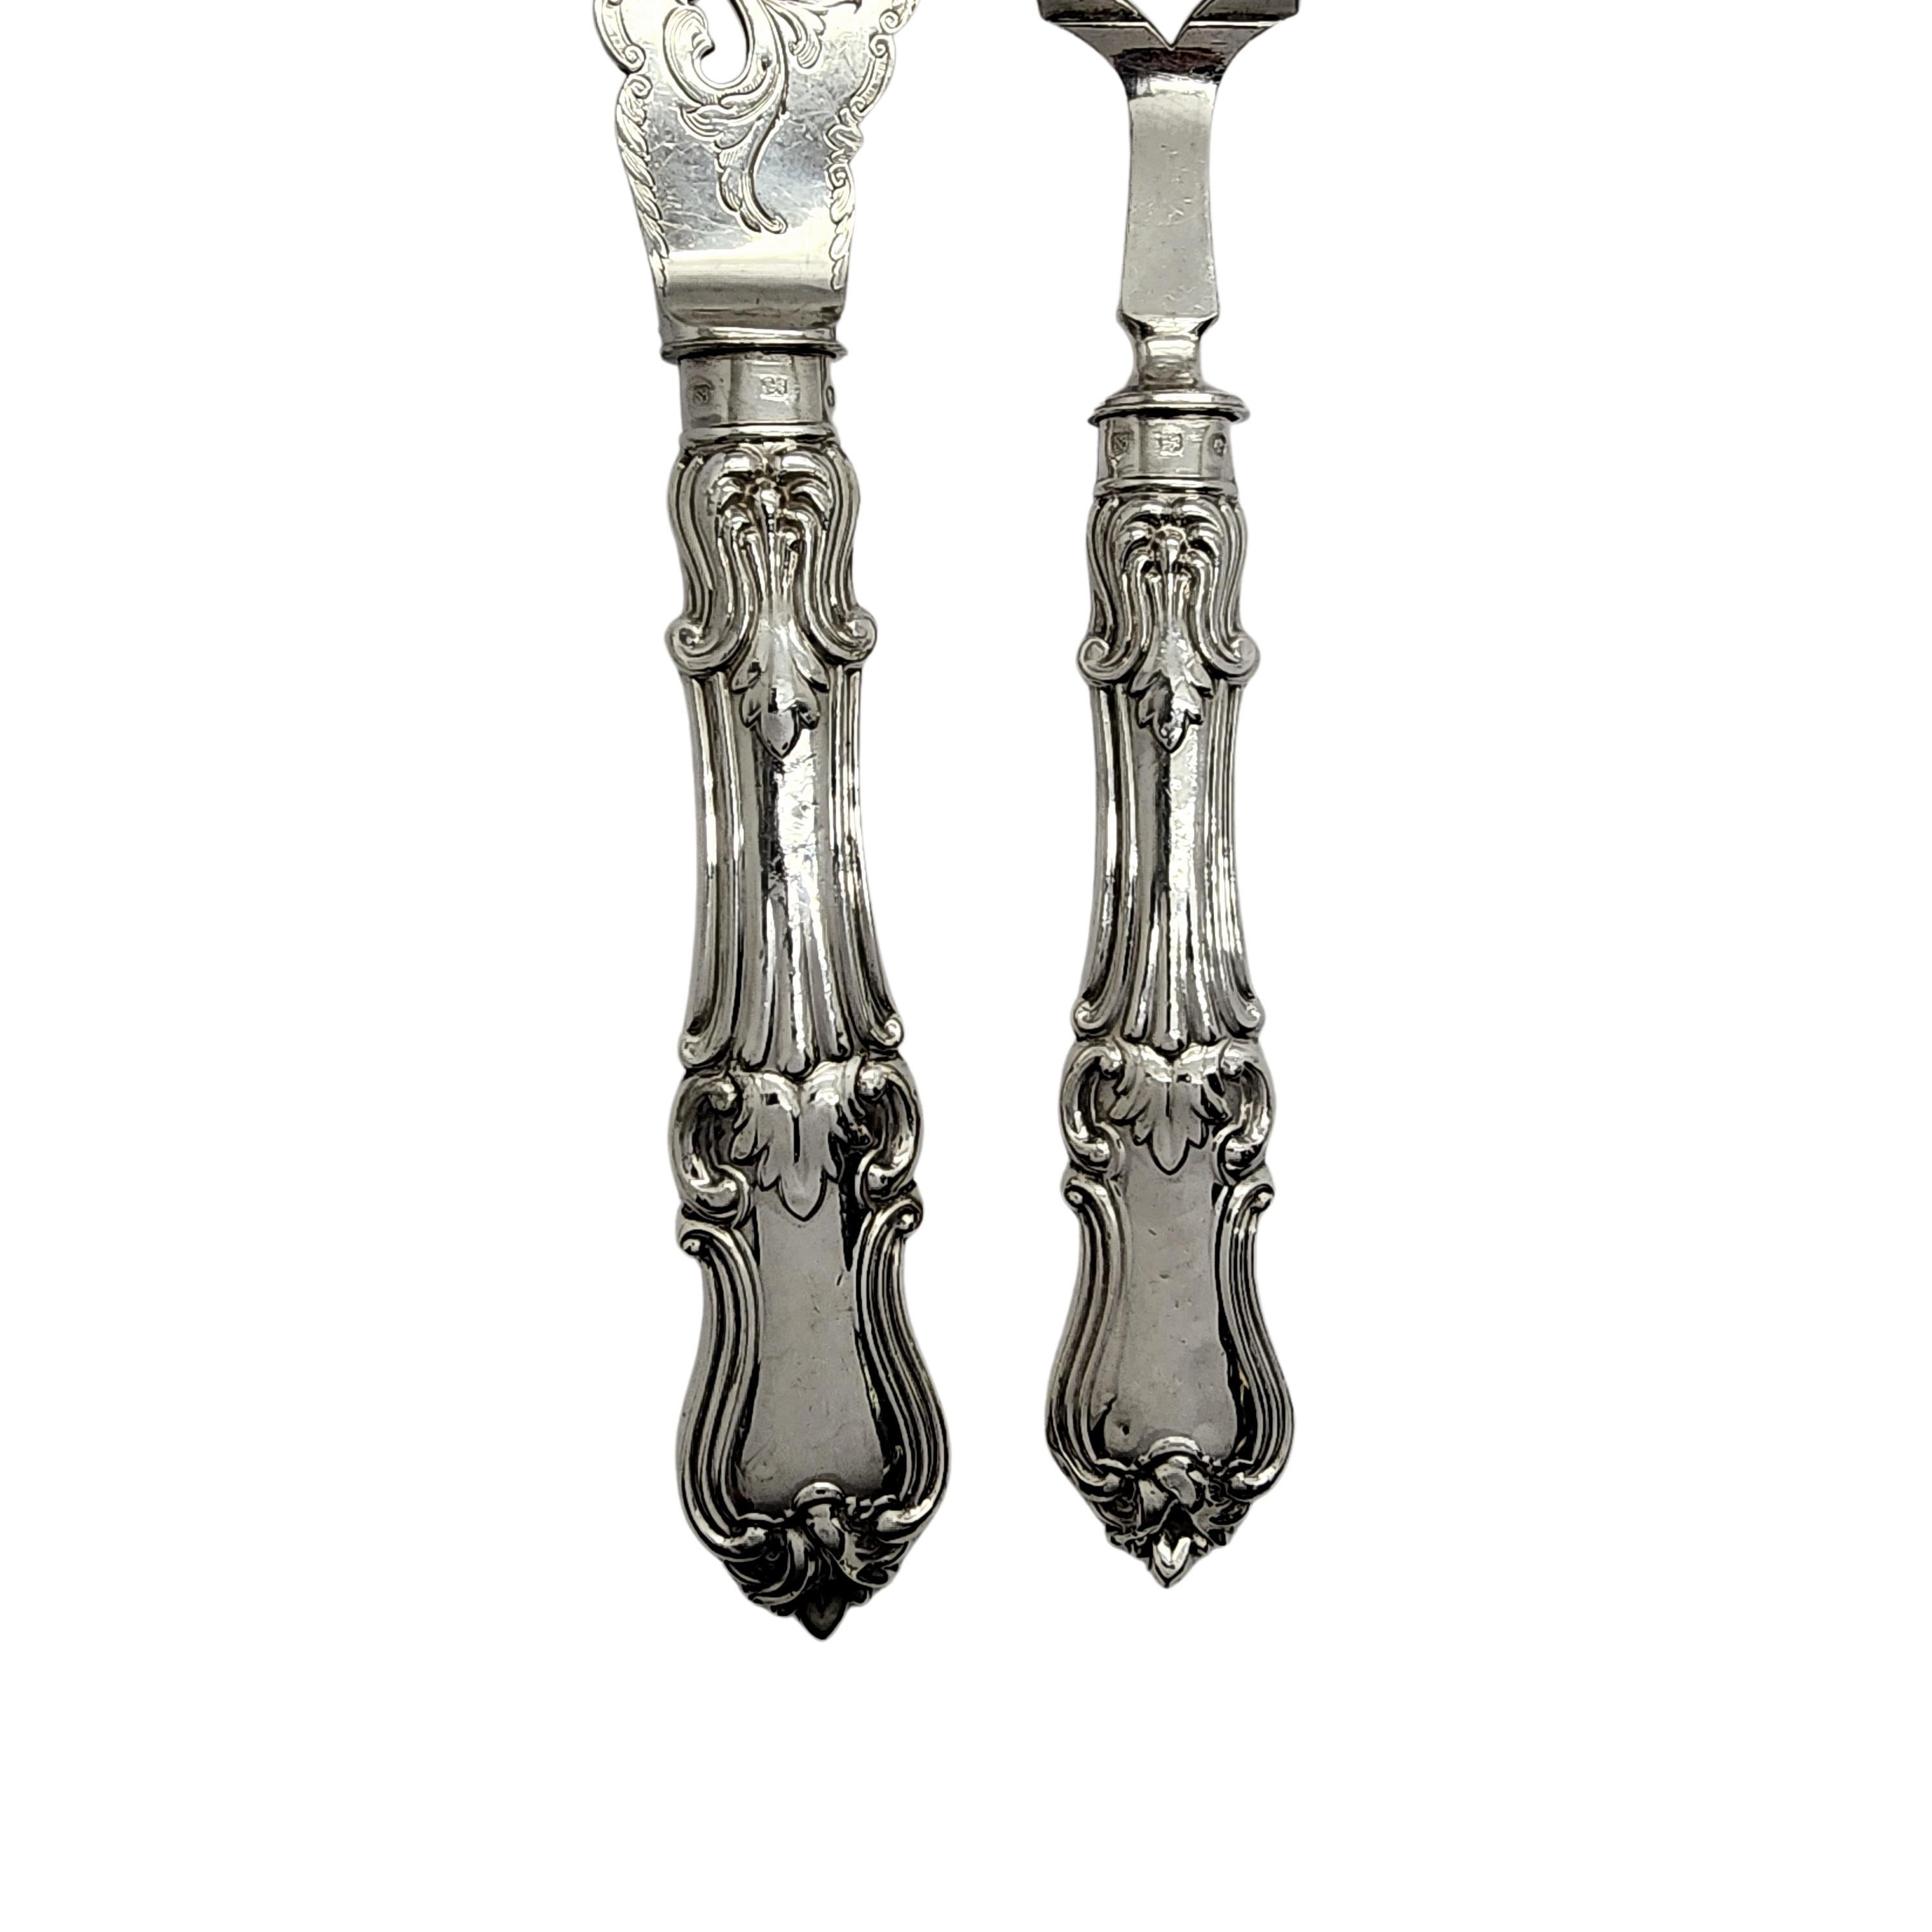 Antique sterling silver fish fork and knife serving set by John Gilbert of England, circa 1858.

No monogram

This beautifully ornate serving set are all sterling silver, both pieces feature open work and etched brite-cut design. There is also an